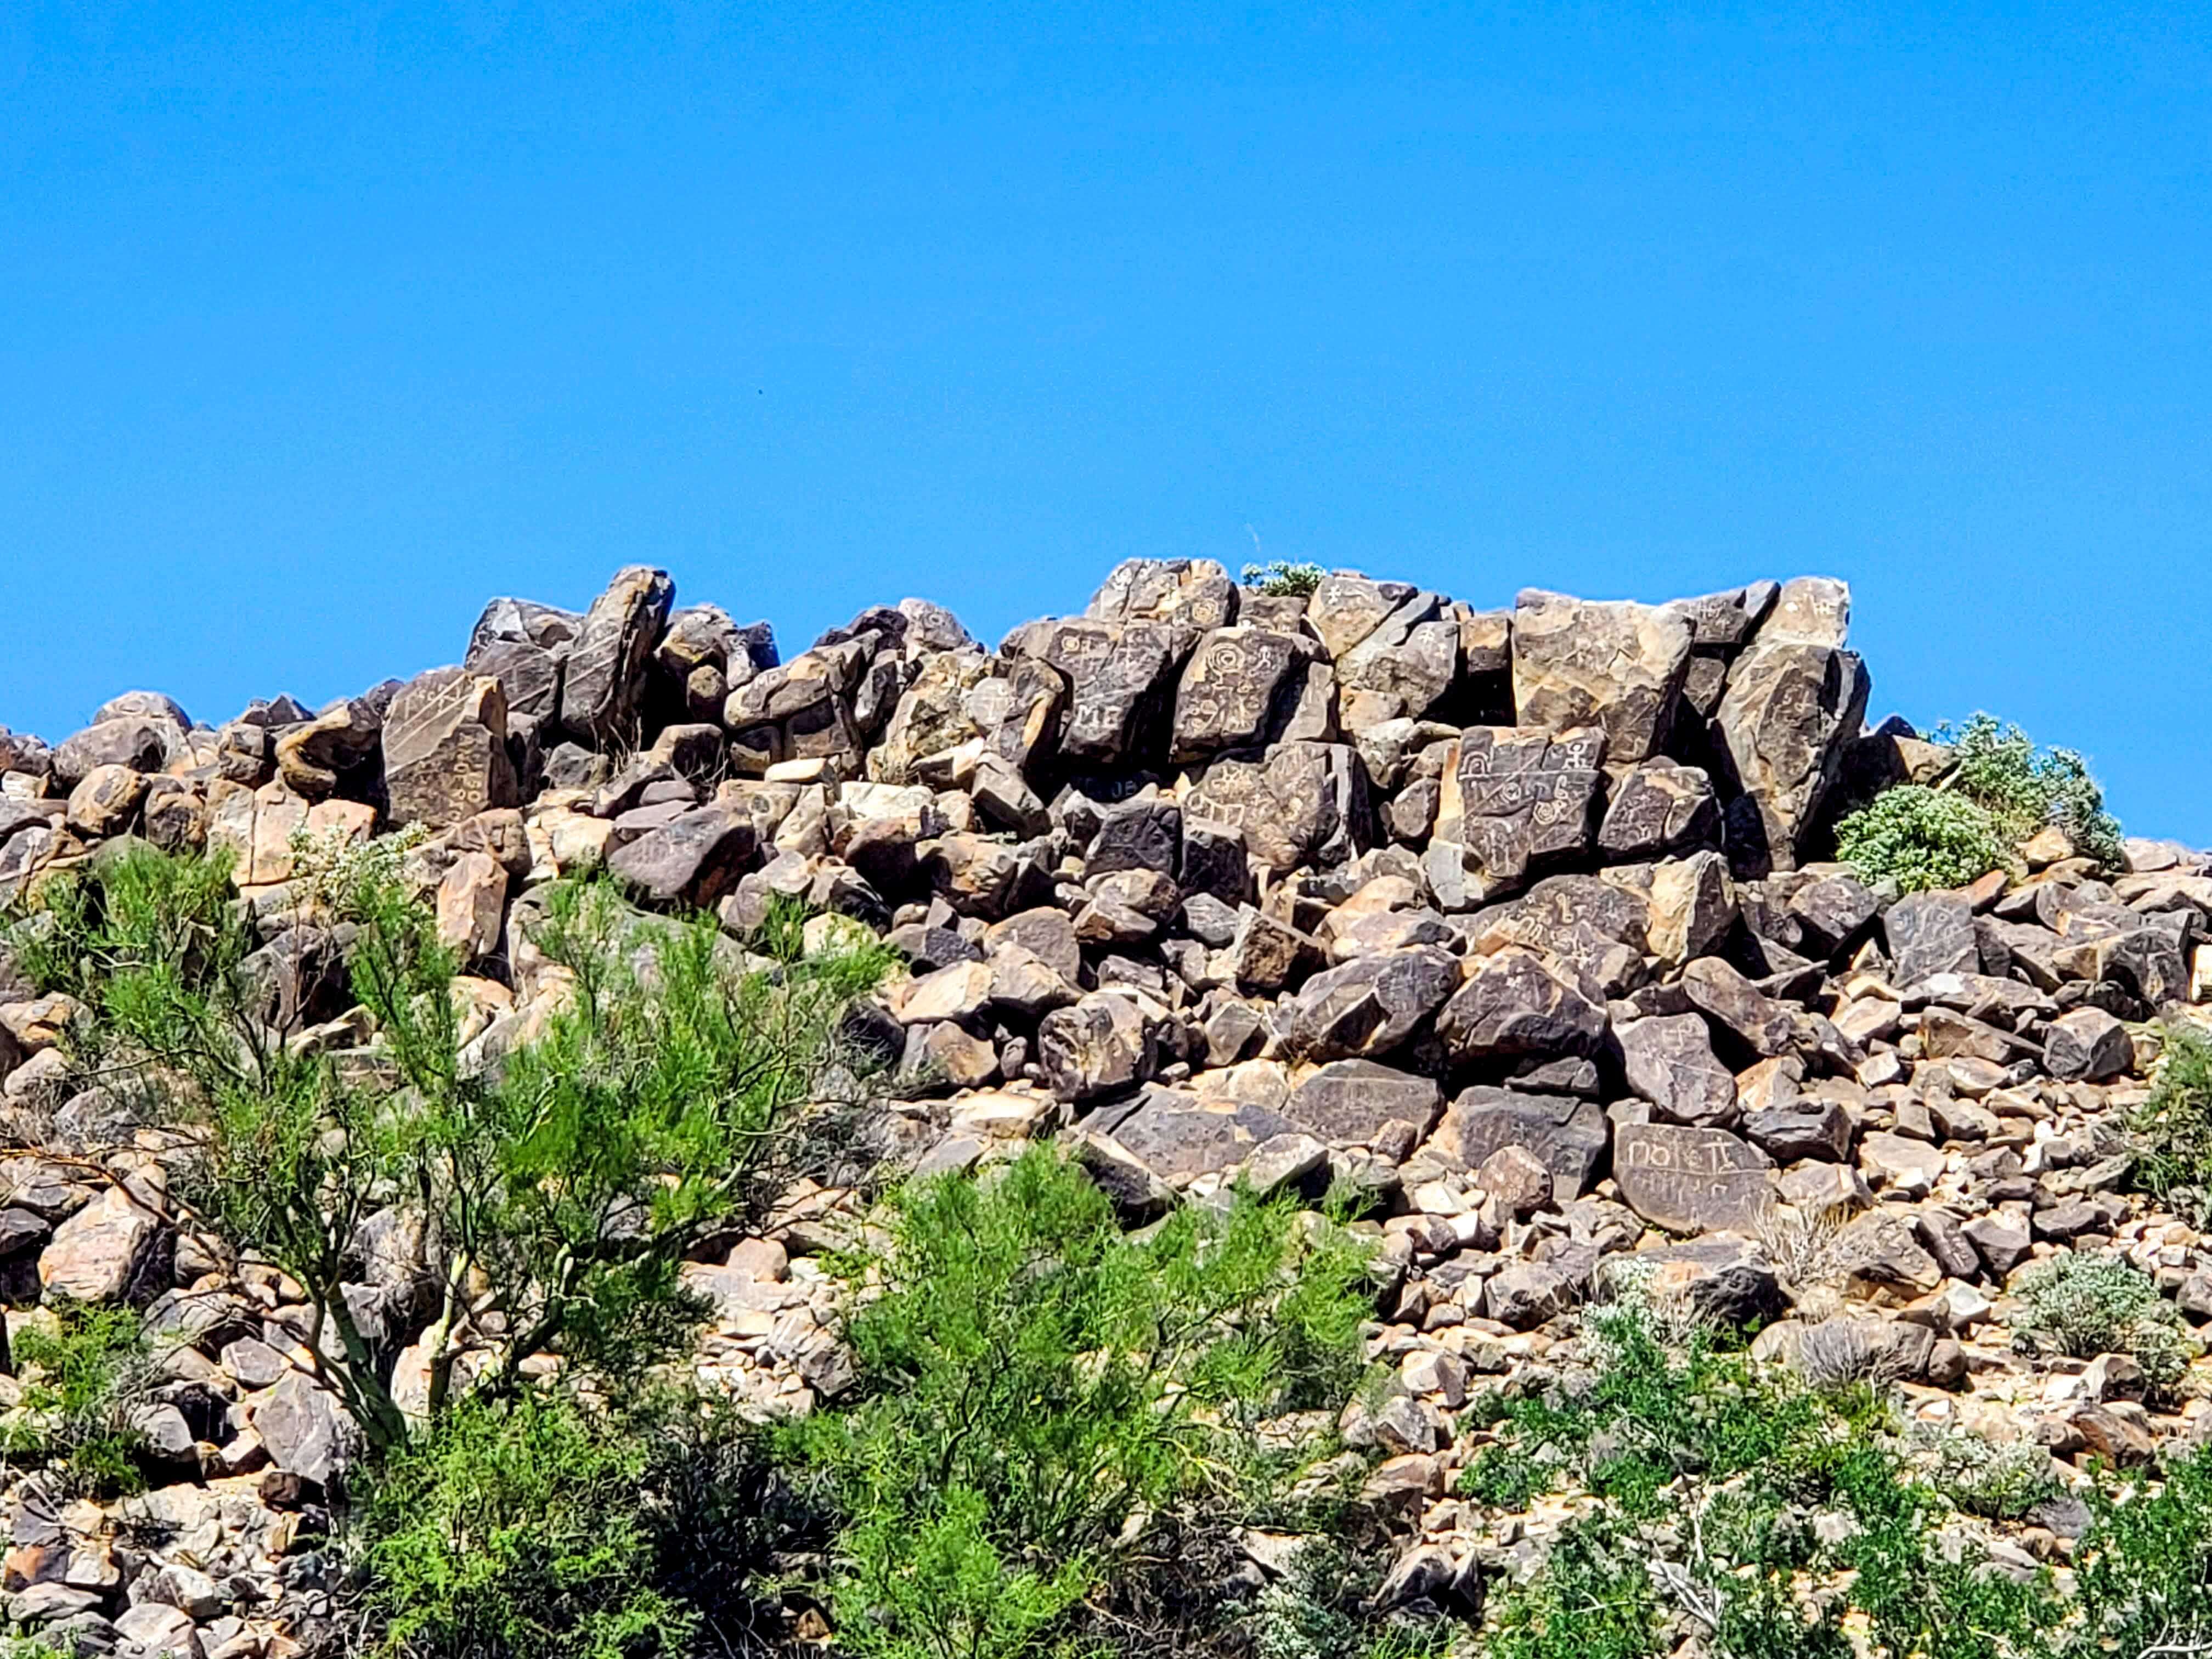 Rocks with petroglyphs under a blue sky at Signal Hill in Saguaro National Park